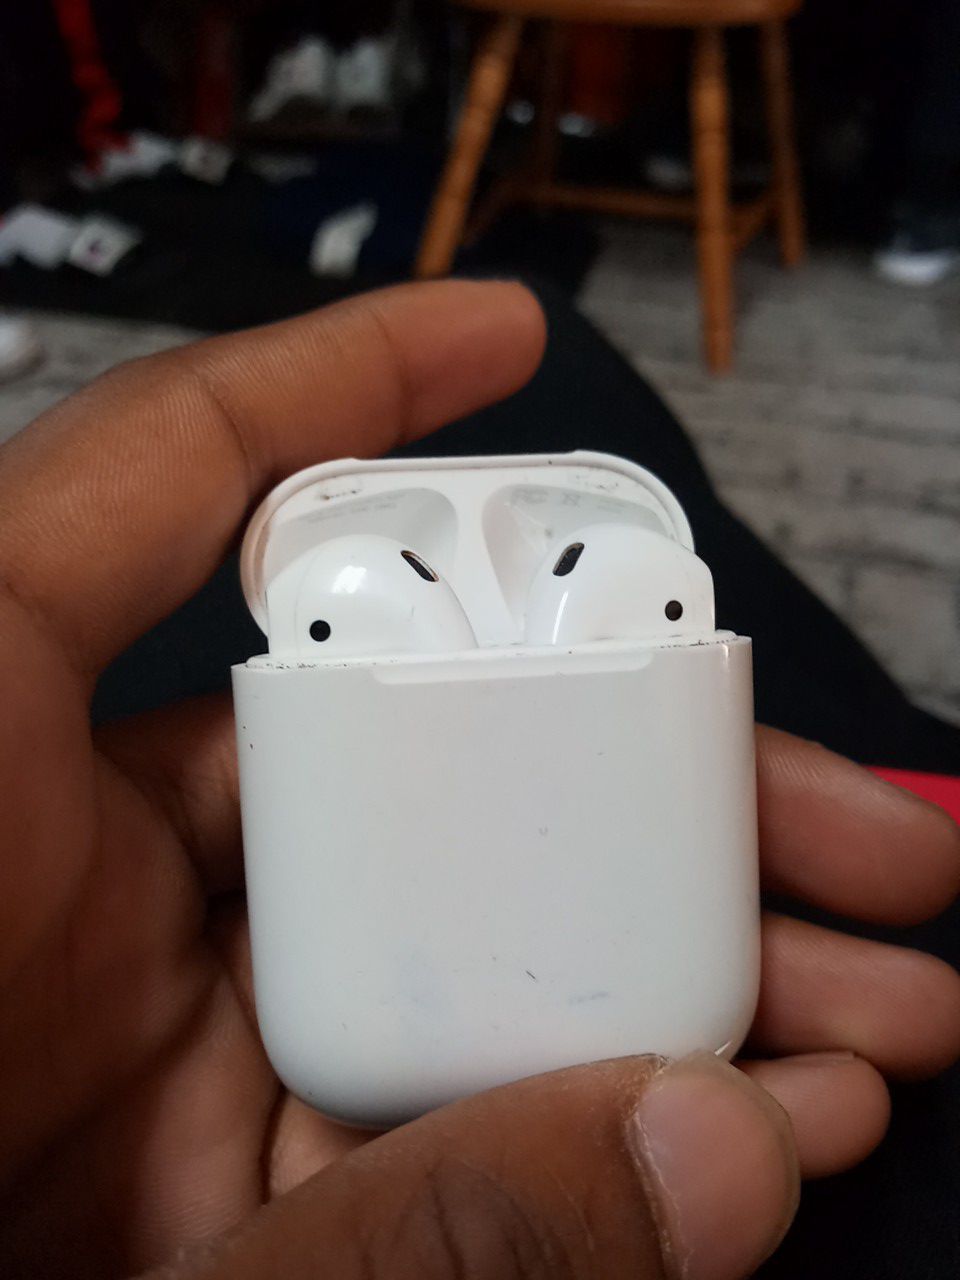 New air pods